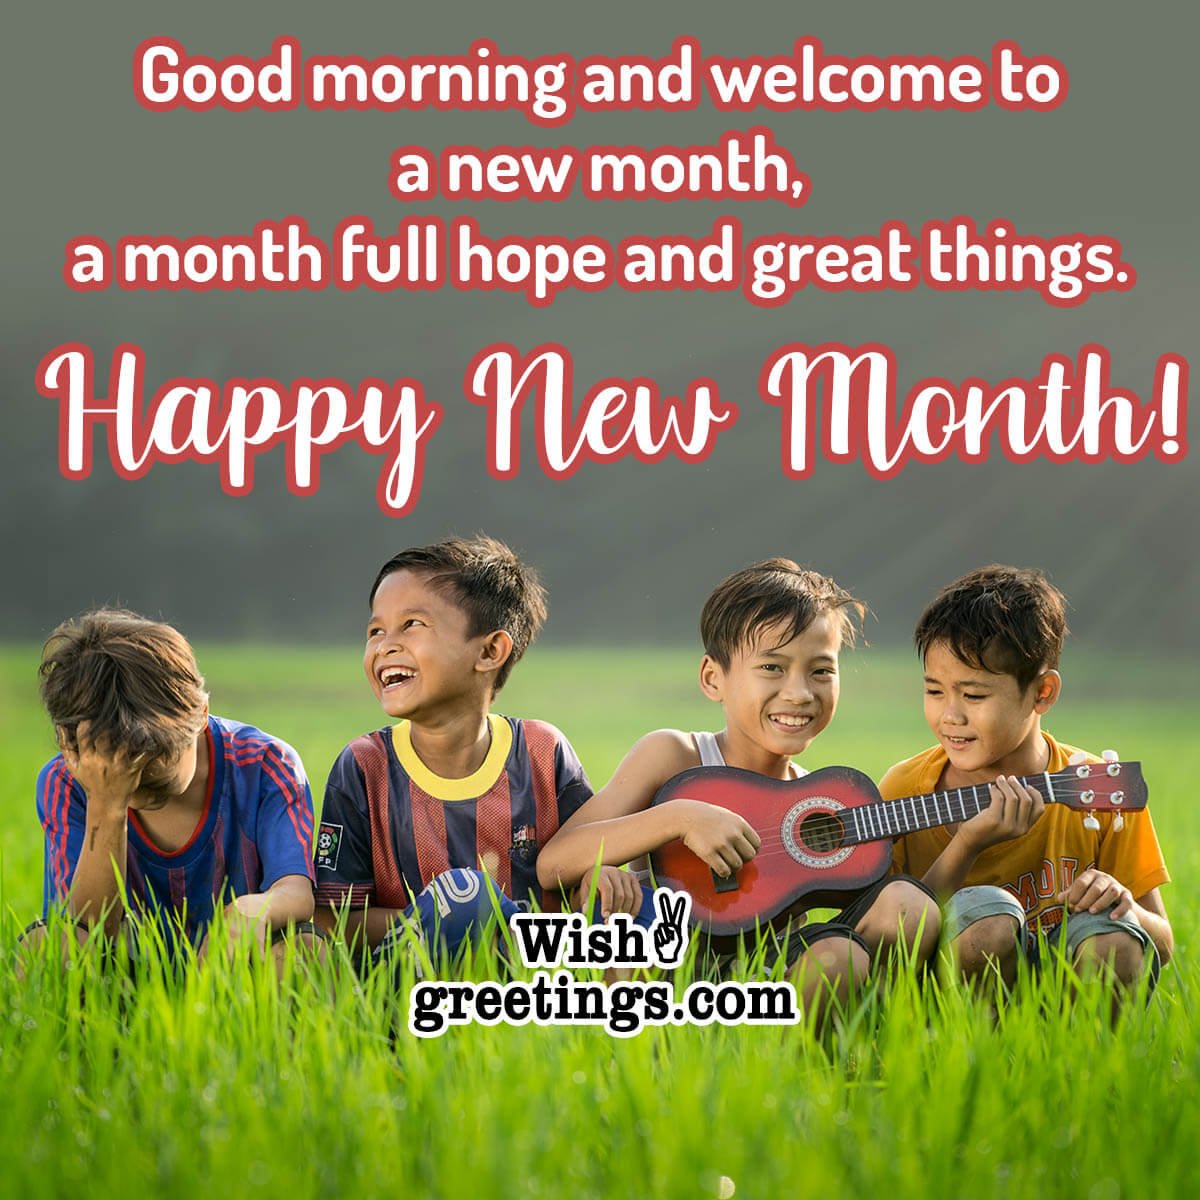 Good Morning Welcome New Month